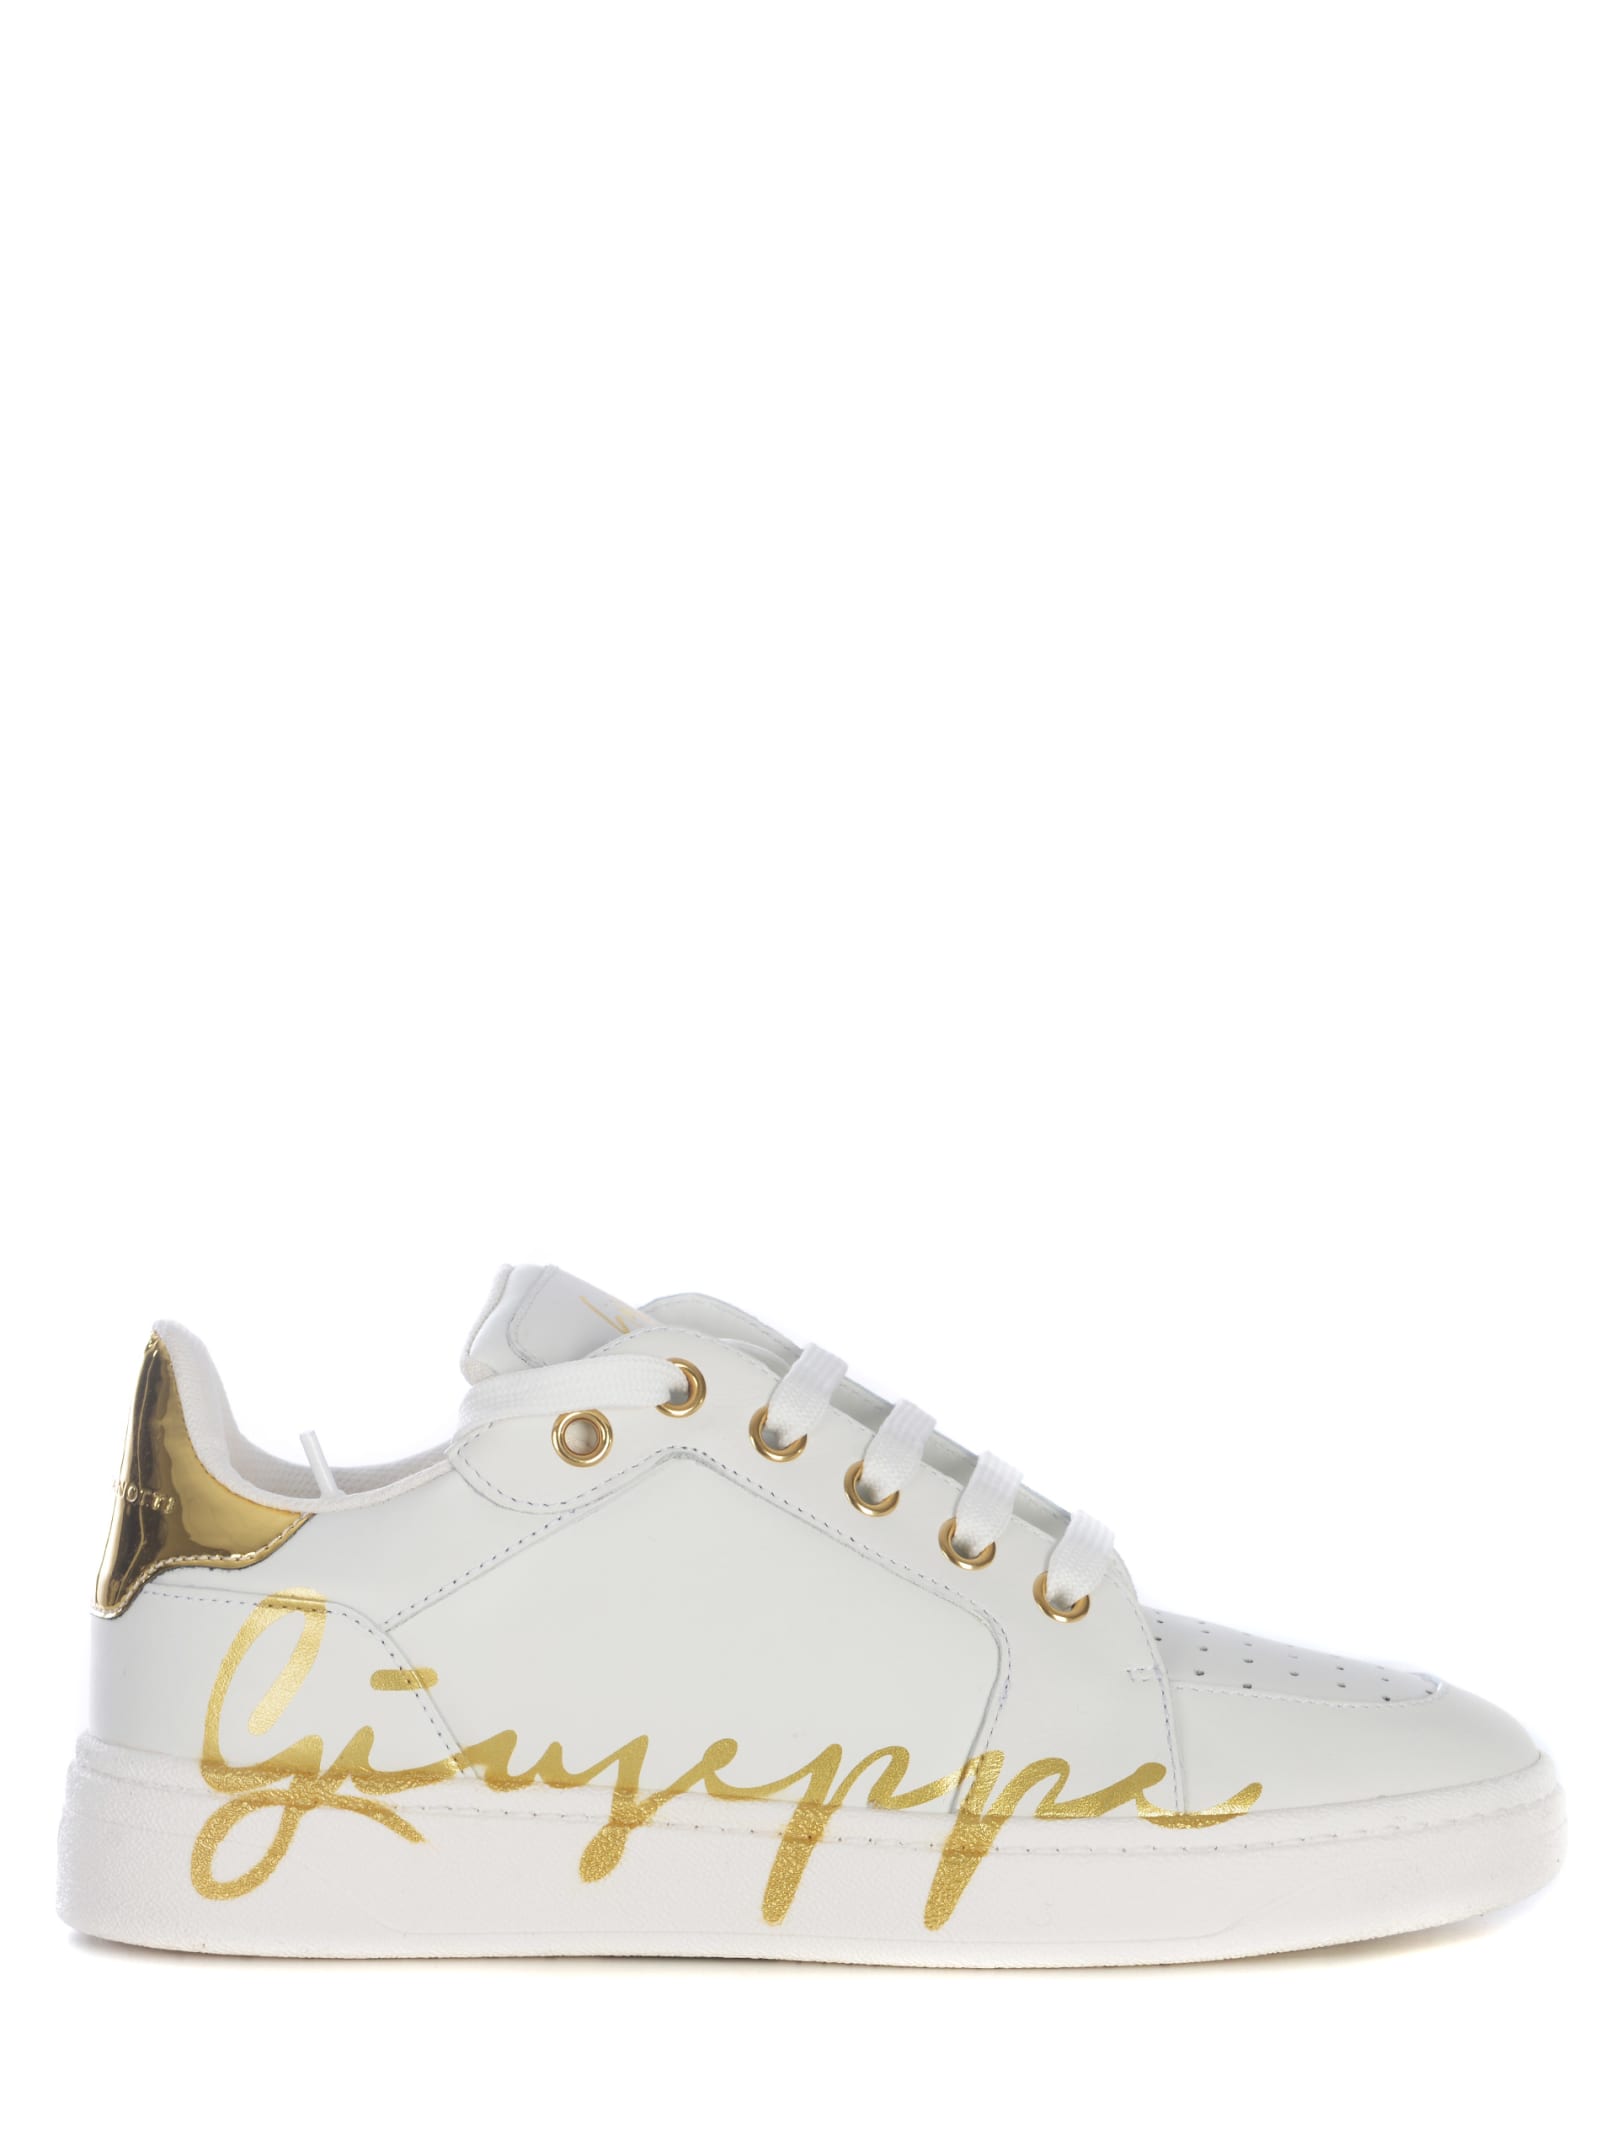 Giuseppe Zanotti Sneakers  Gz94 Made Of Leather In White